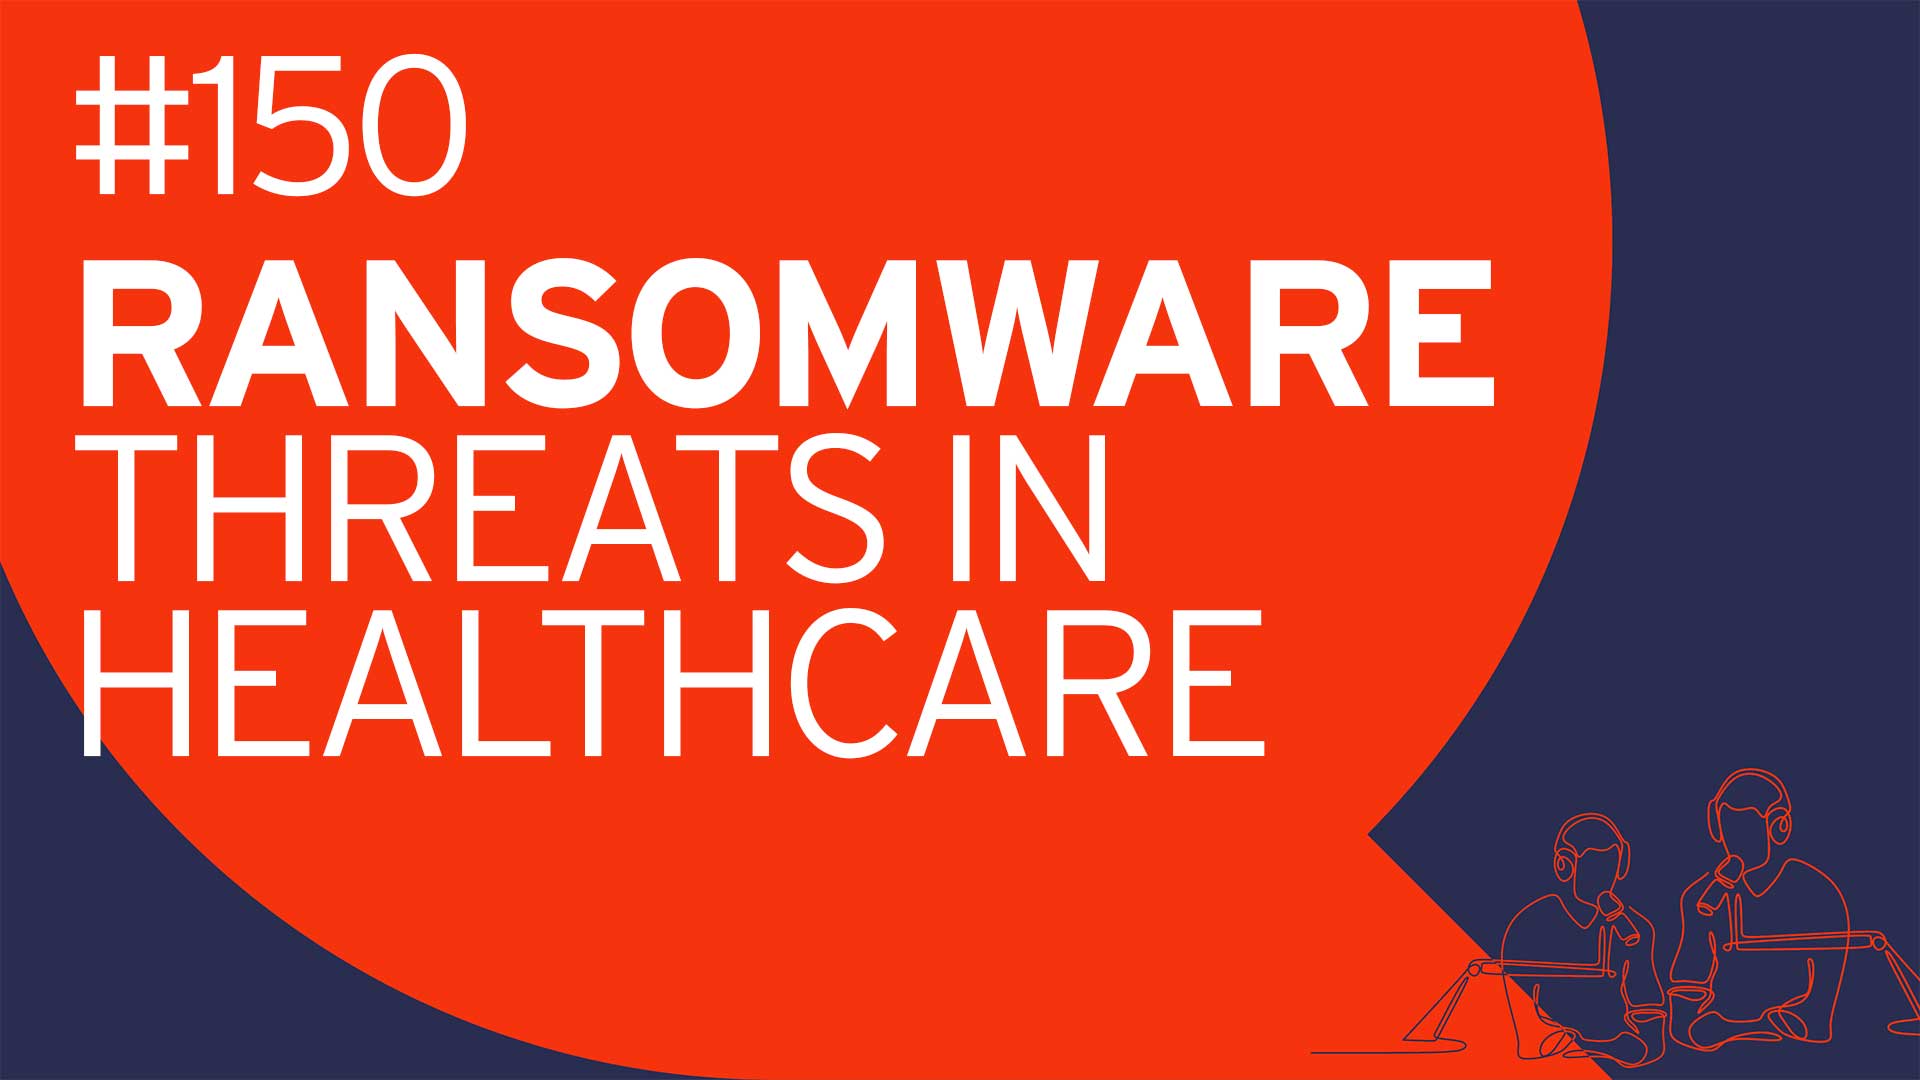 Analyst Chat #150: Clear and Present Danger - Ransomware Threats to Healthcare Providers